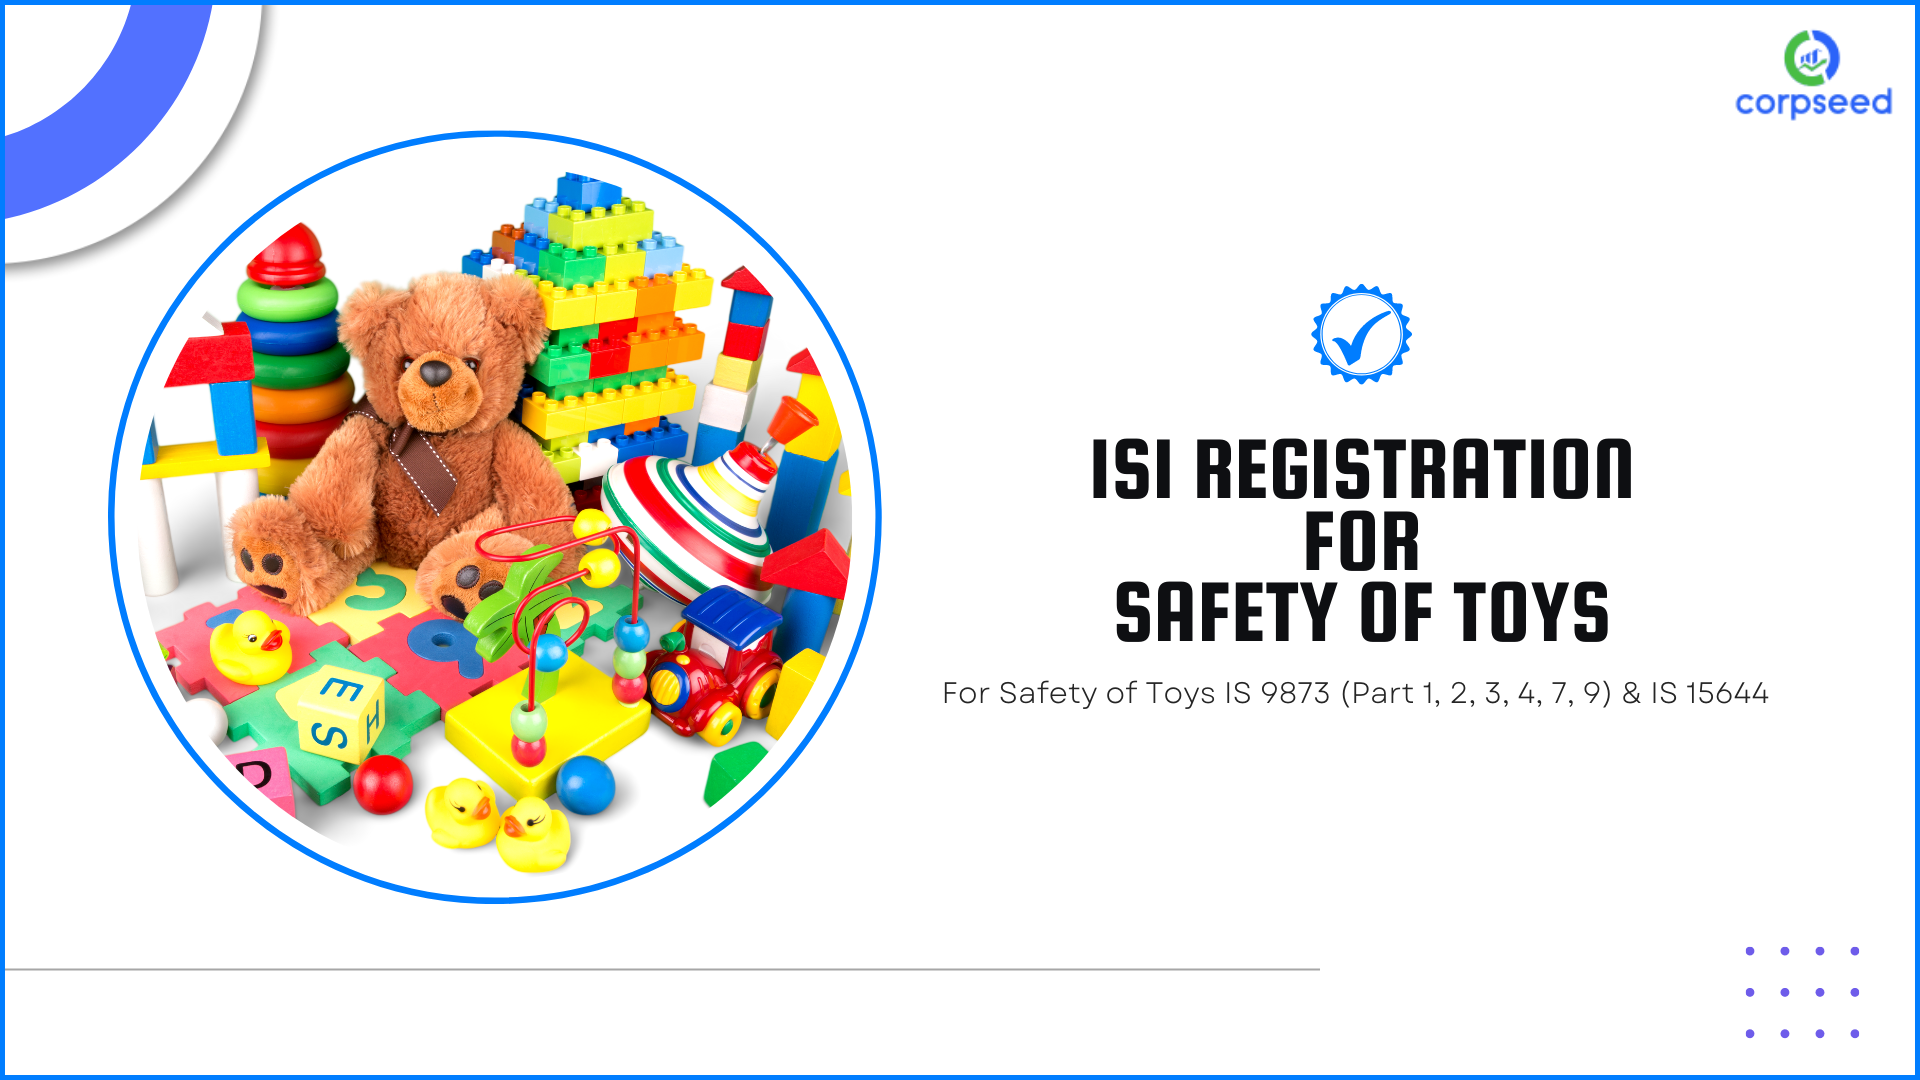 isi-registration-for-safety_of_toys-is-9873-part1-2-3-4-7-9-and-is-15644_corpseed.png